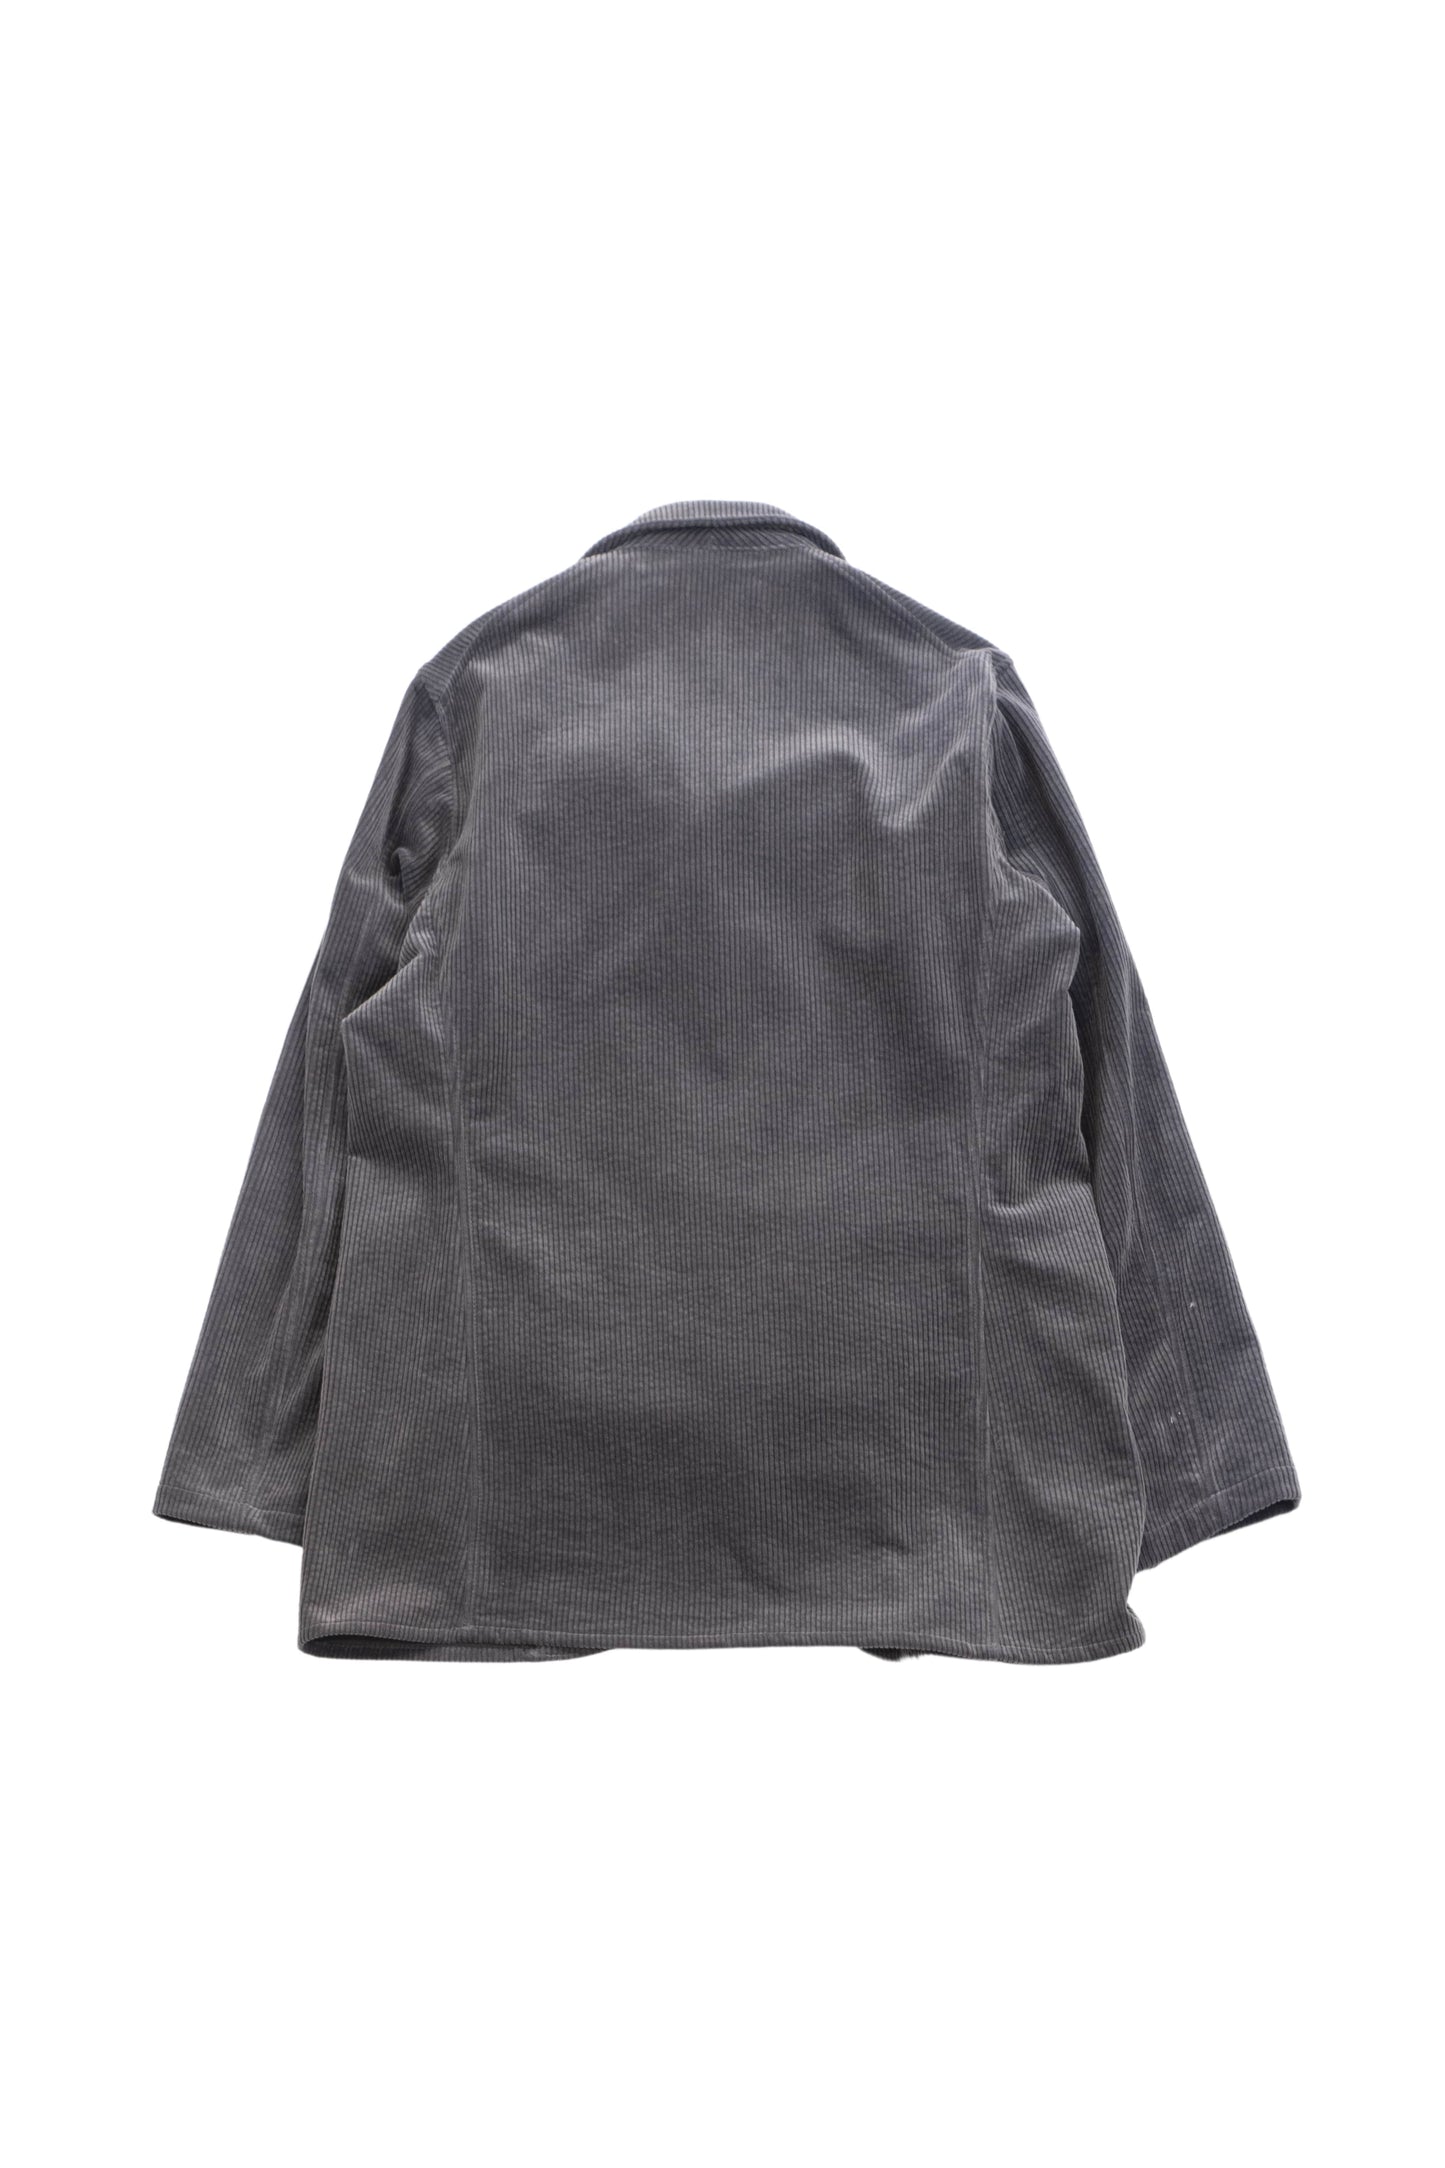 3 BUTTONS JACKET corduroy - GRAY